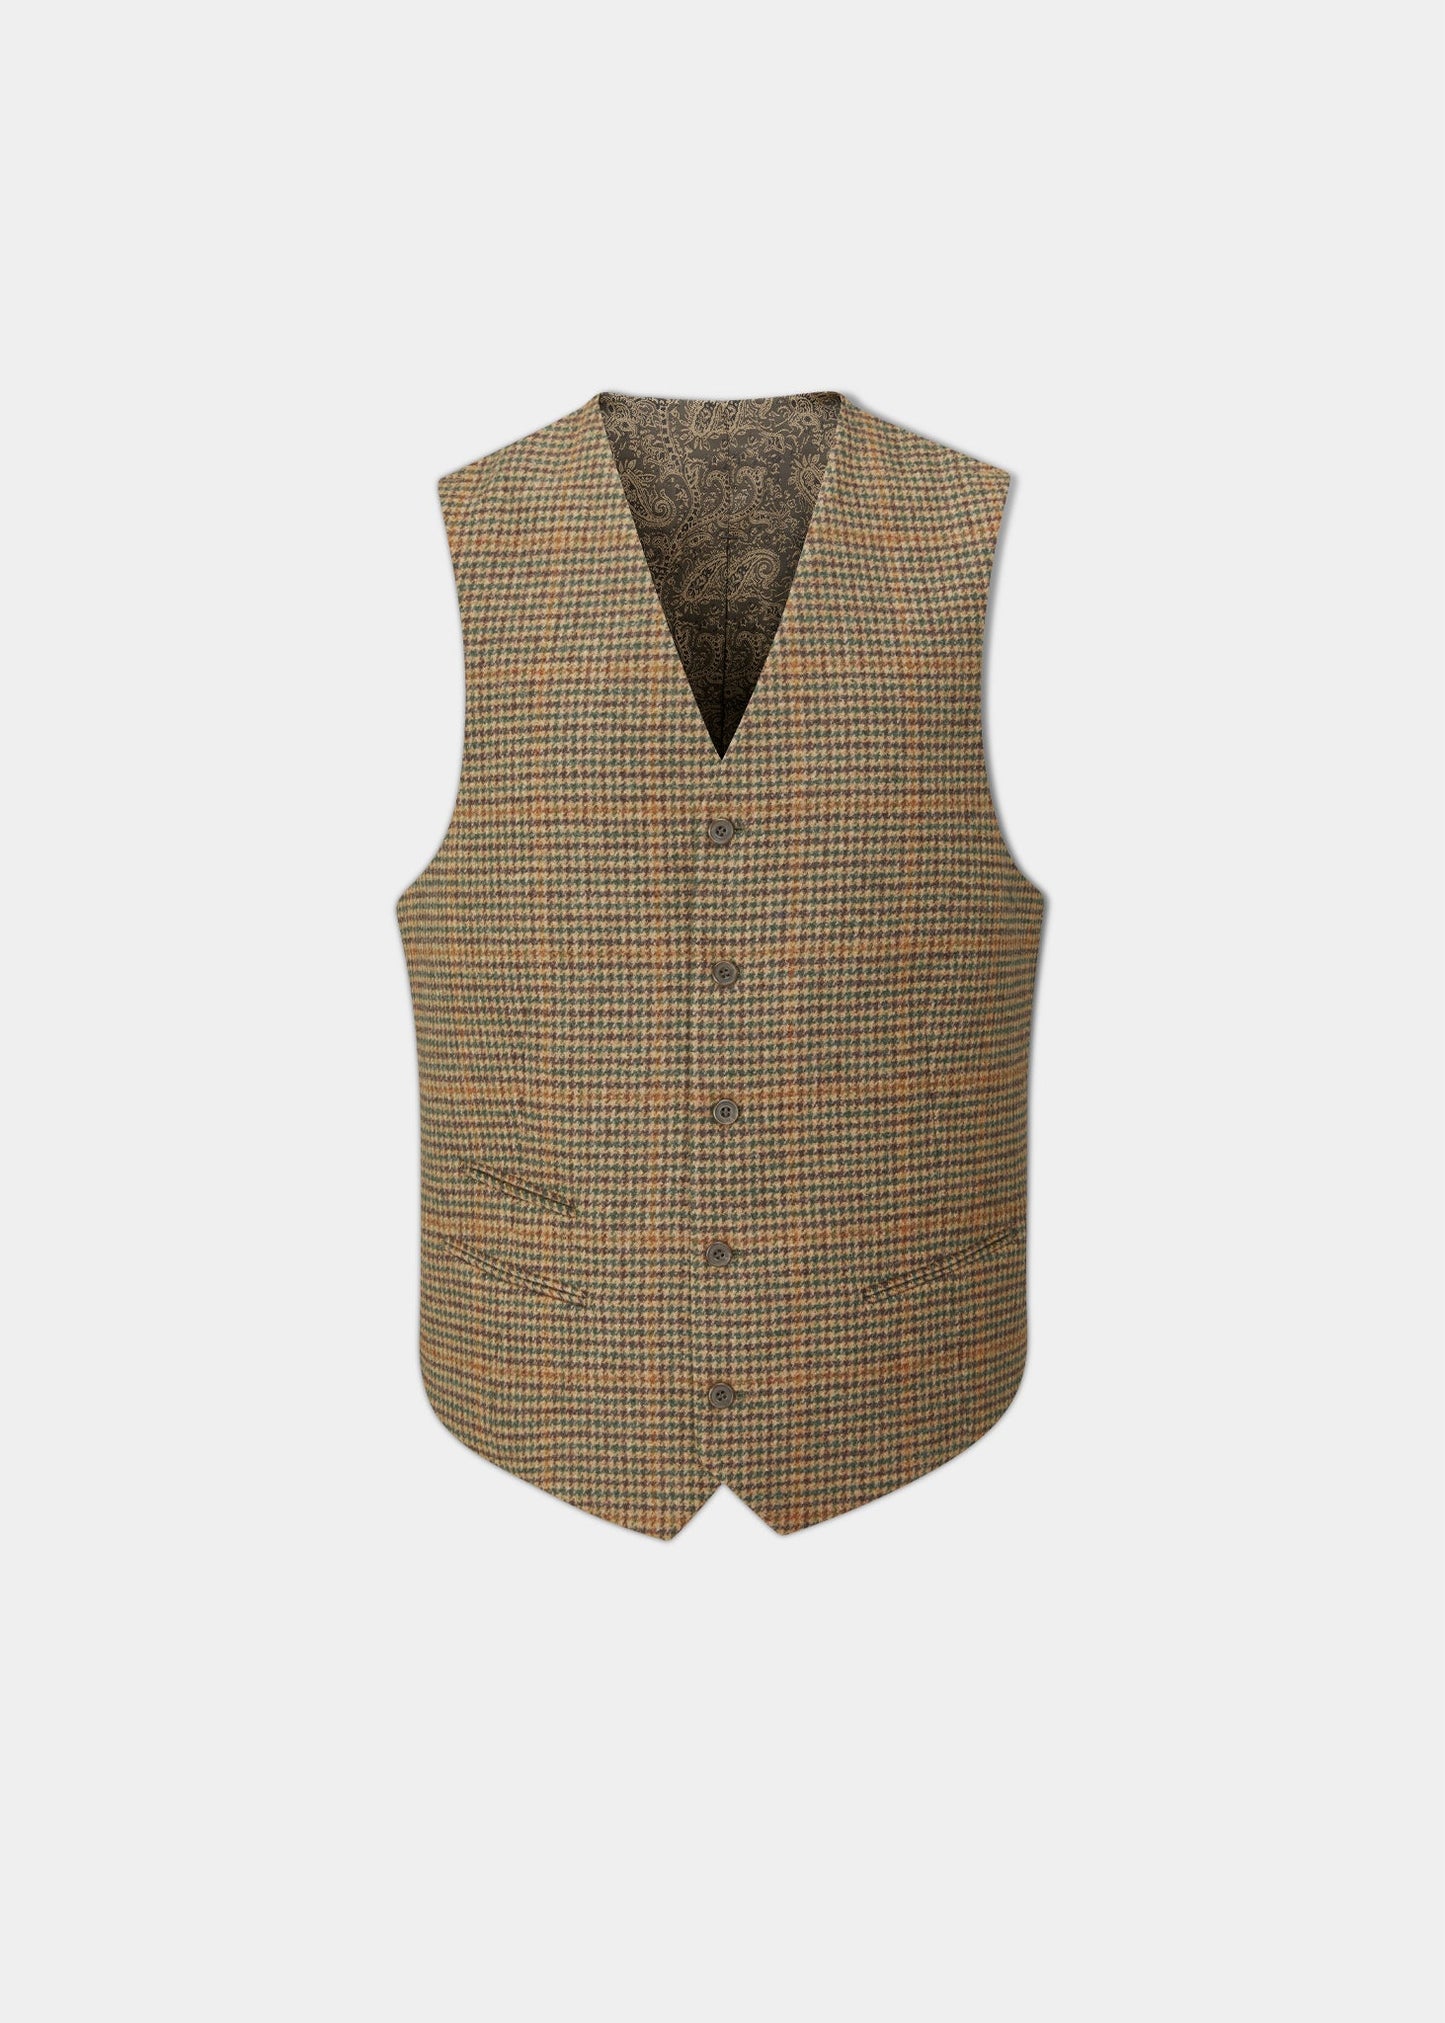 Surrey Men's Tweed Lined Country Waistcoat In Sycamore 